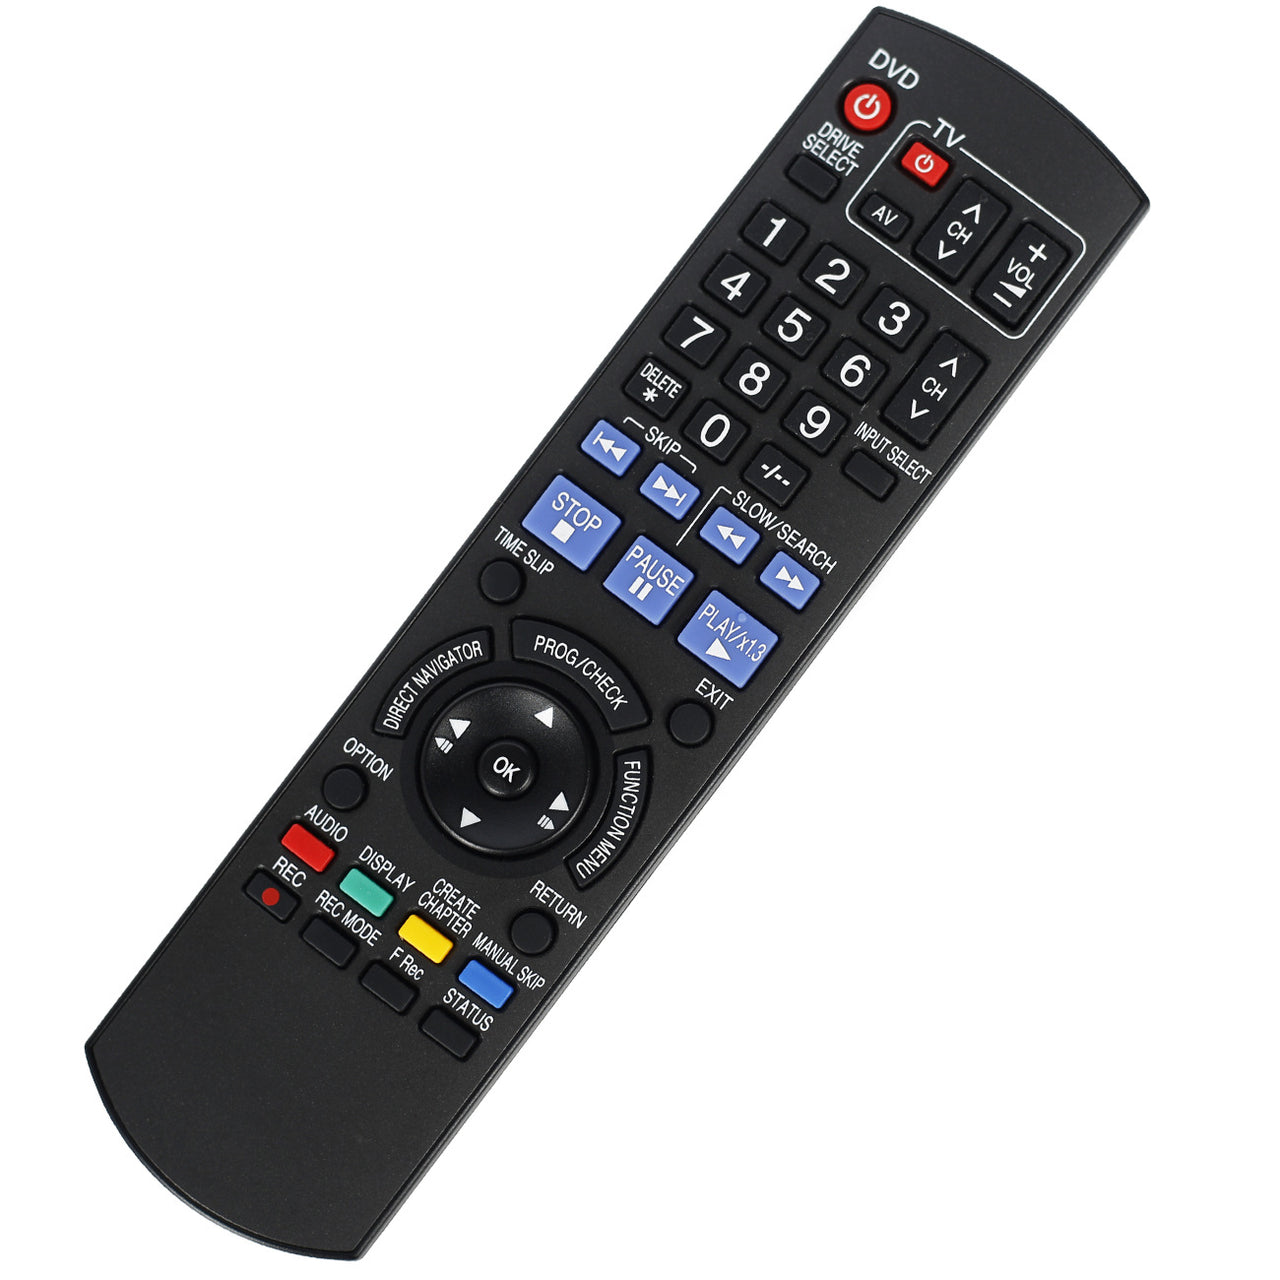 N2QAYB000134 Replacement Remote for Panasonic DVD Recorders